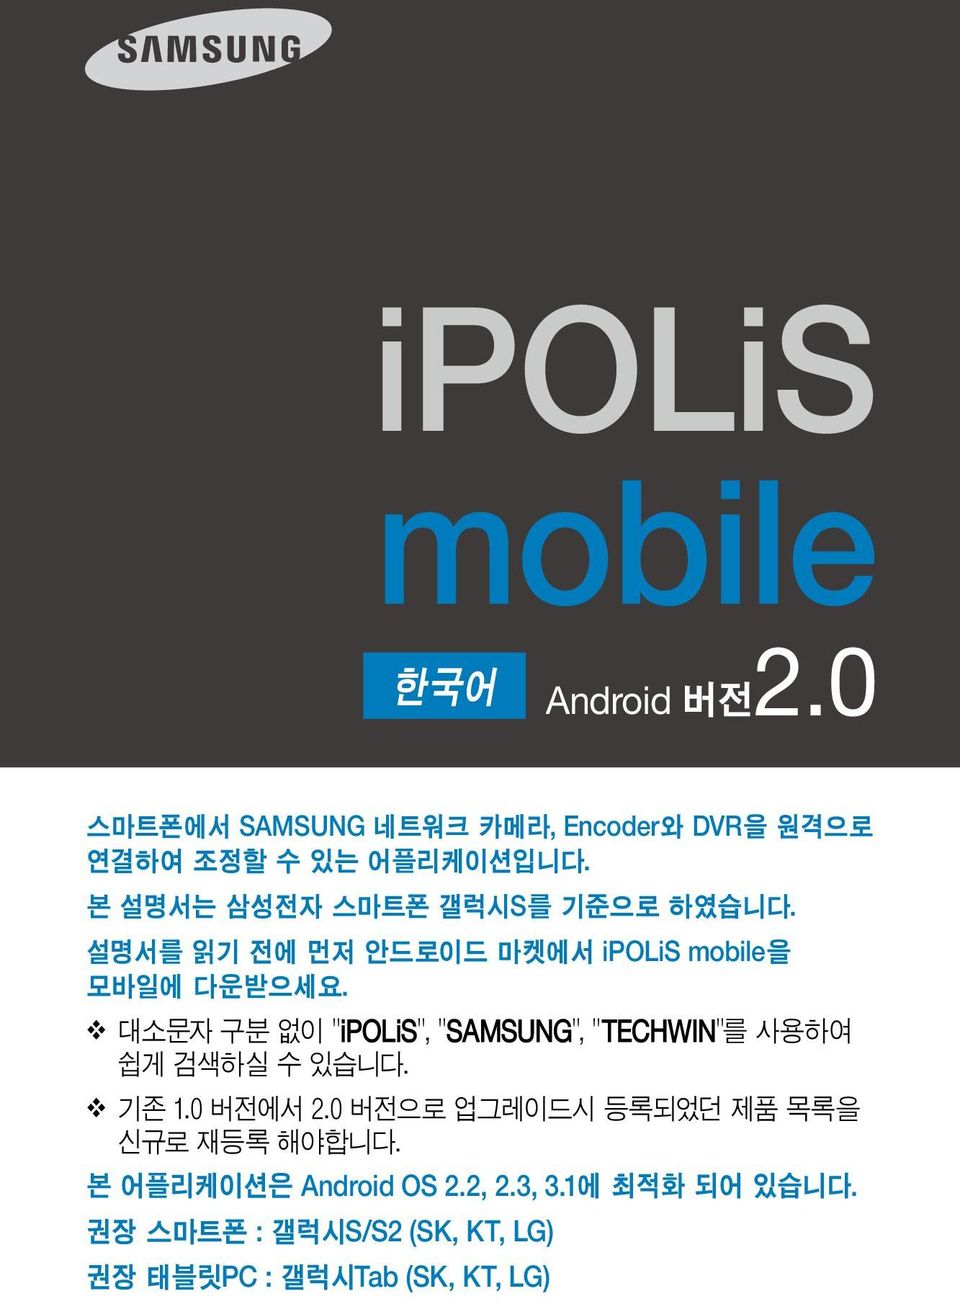 Android OS 2.2, 2.3, 3.1.